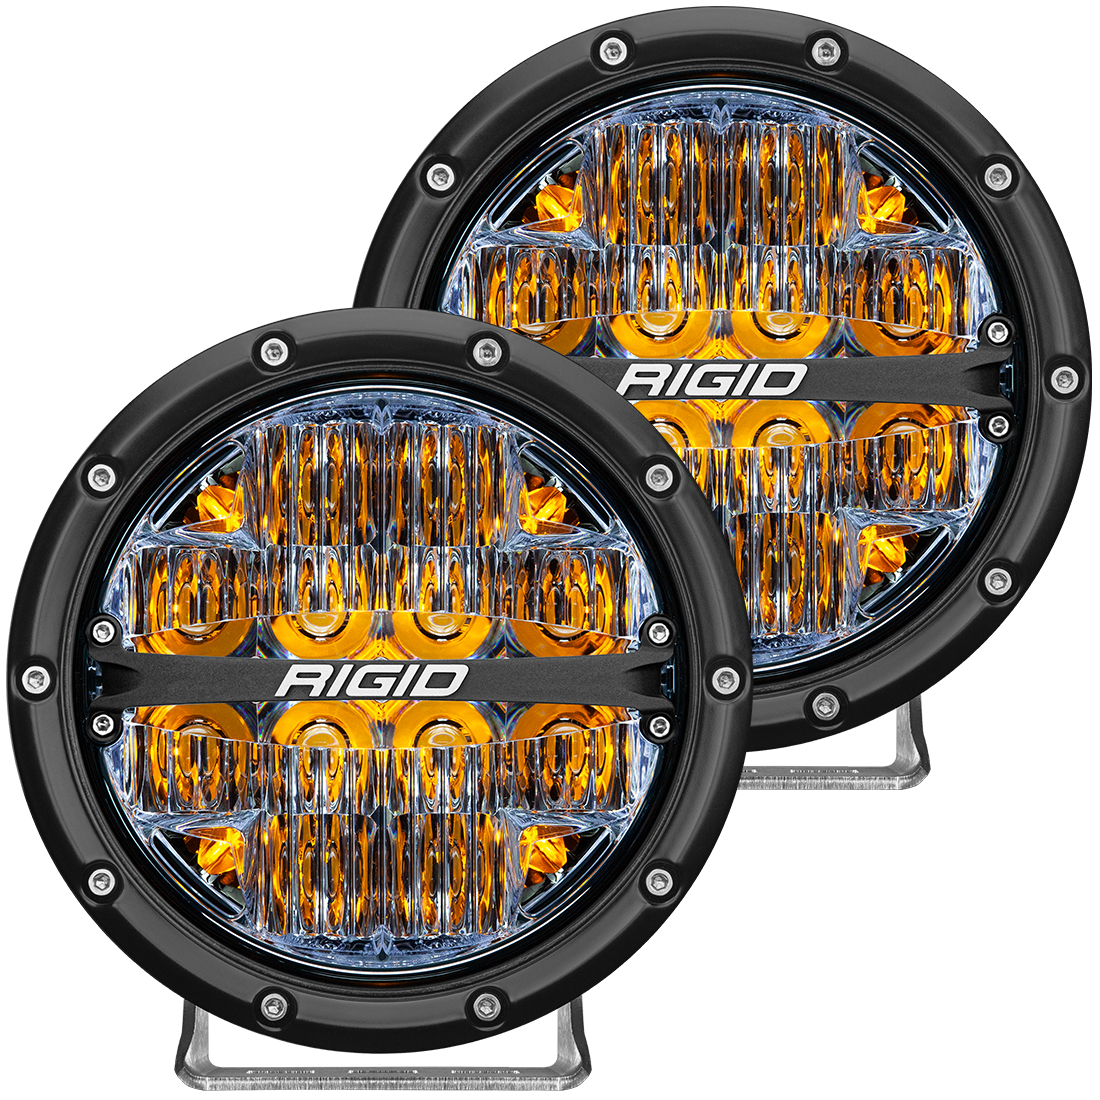 Rigid Industries 360-Series 6 Inch Led Off-Road Drive Beam Amber Backlight Pair - Click Image to Close